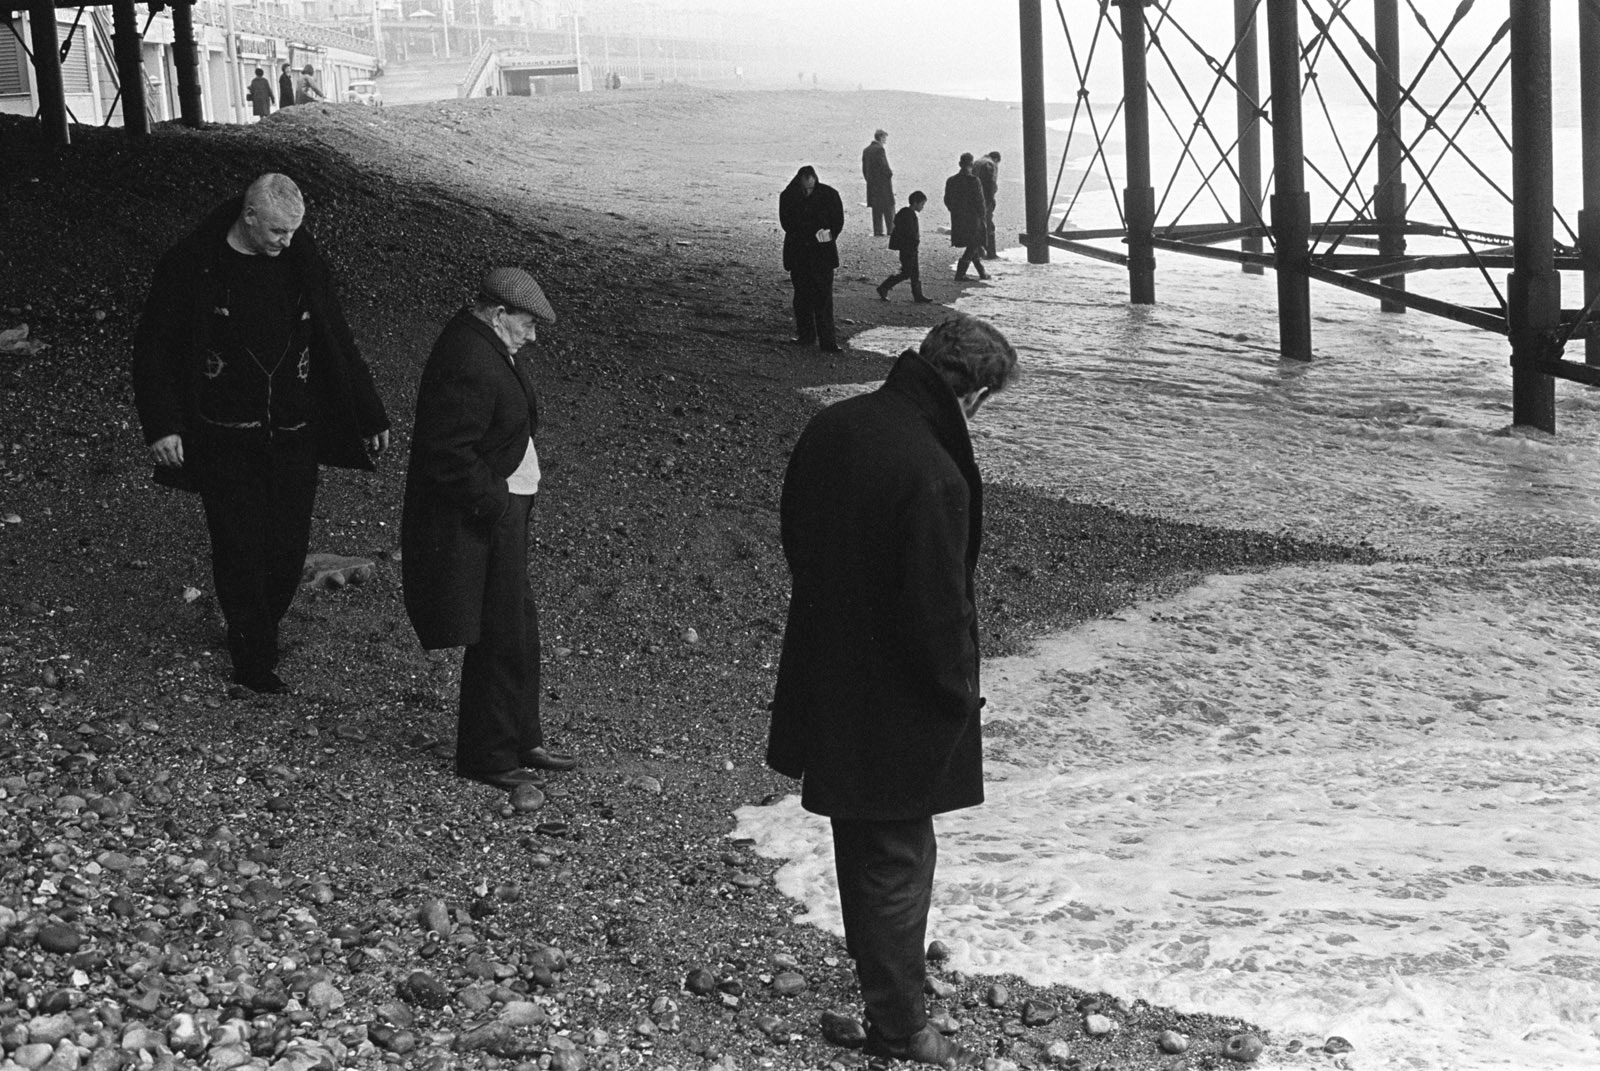 Blacksanding, sunday morning, under Brighton Pier looking for coins that are washed up, Brighton, Sussex, 1970